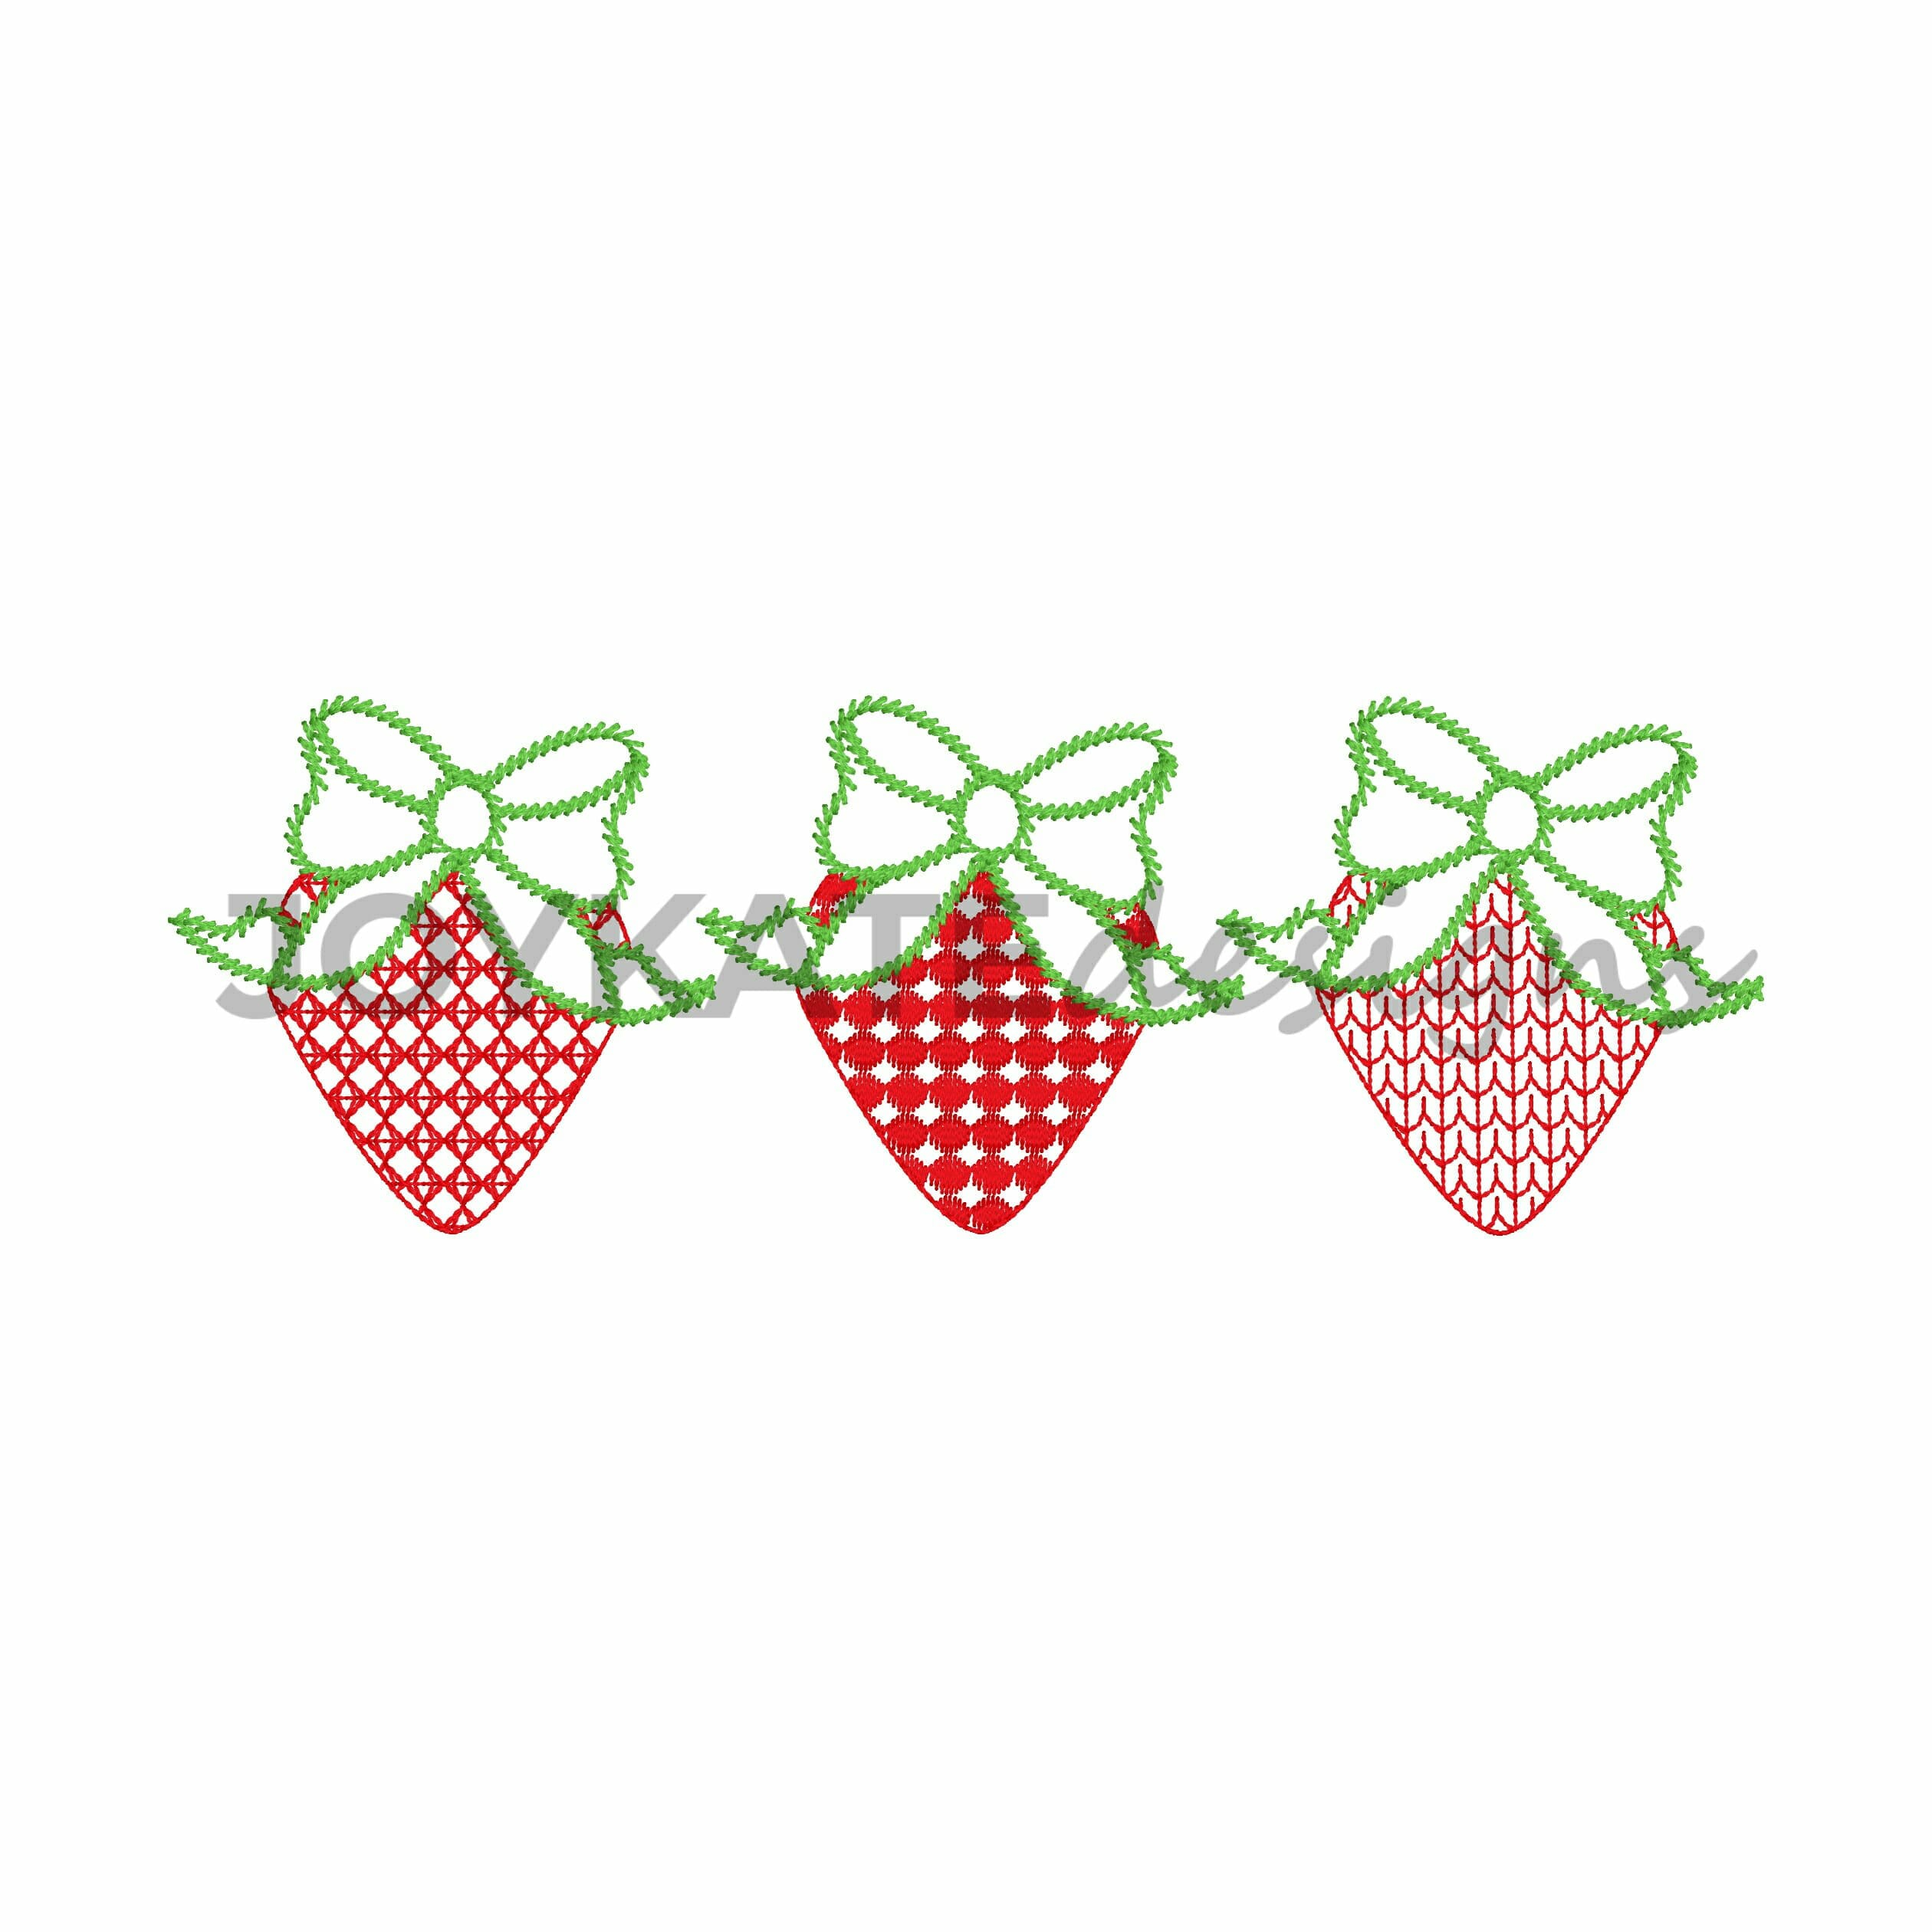 Strawberry Embroidery Pattern Strawberry With Bow Trio Filled Stitch Embroidery Design